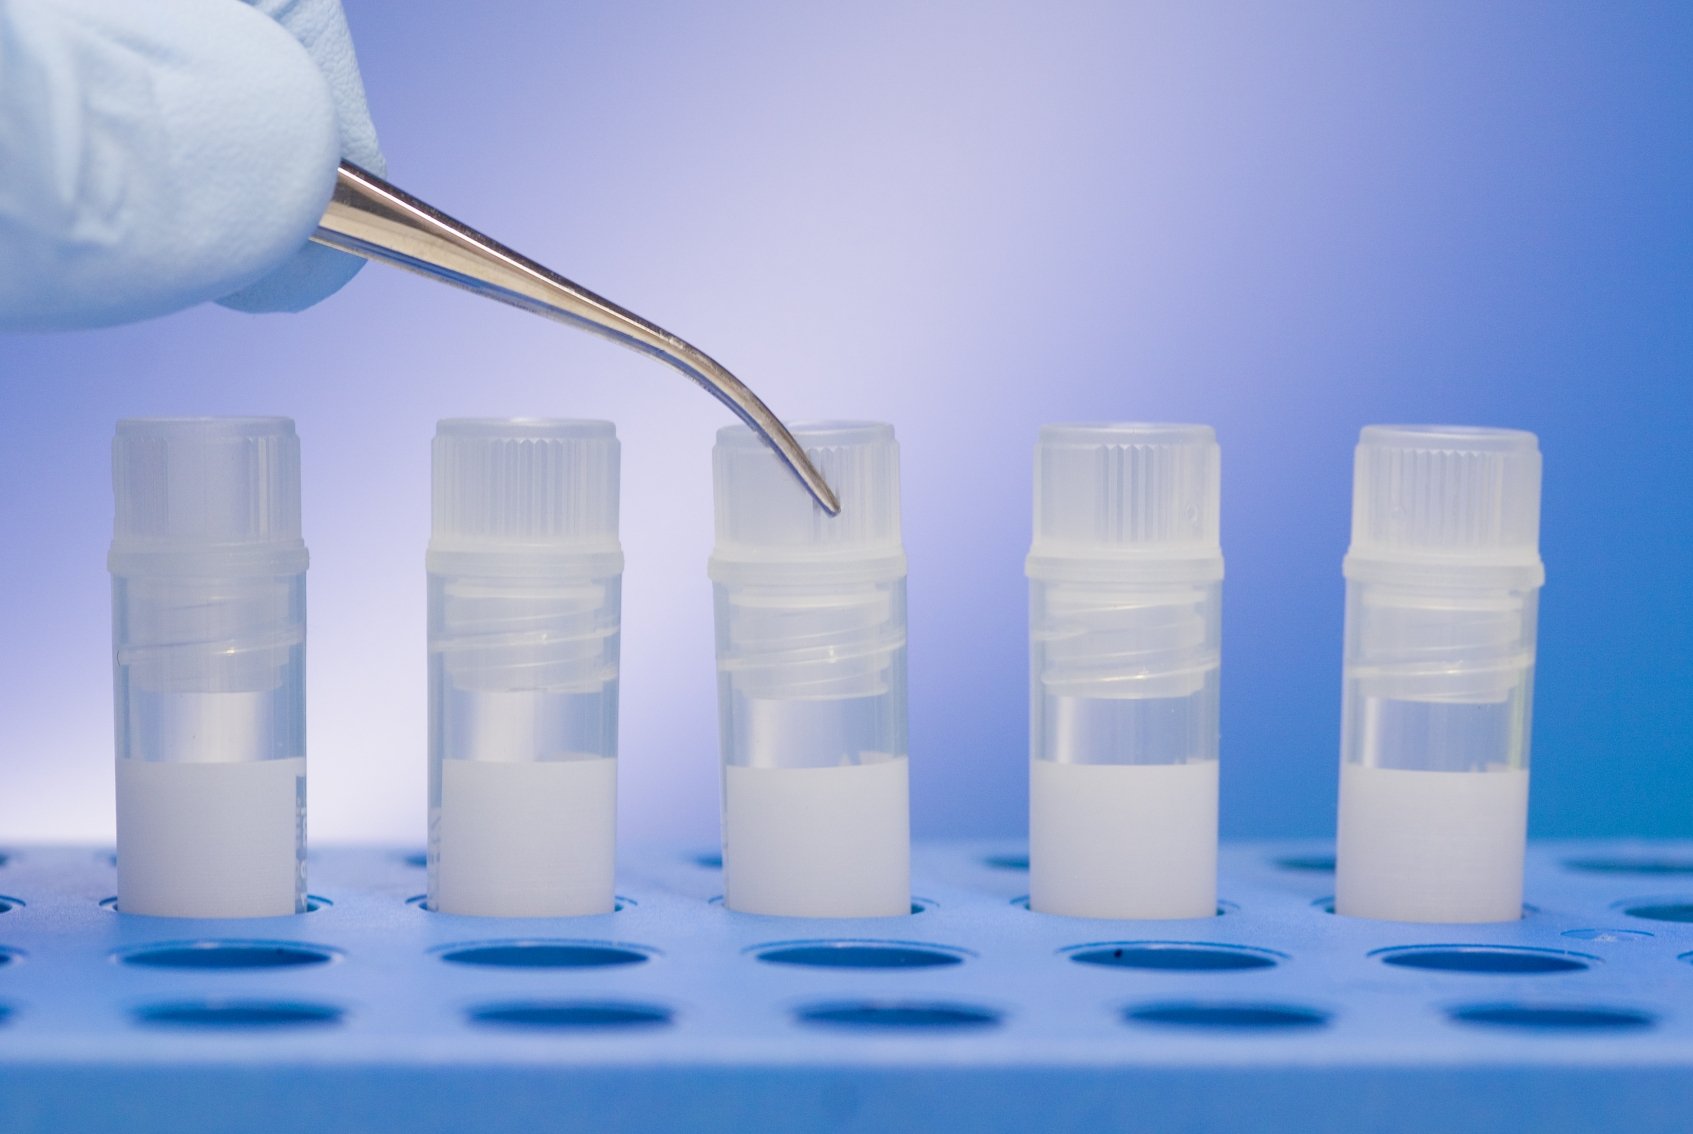 3 Key Trends You Must Know to Profit from Stem Cell Products